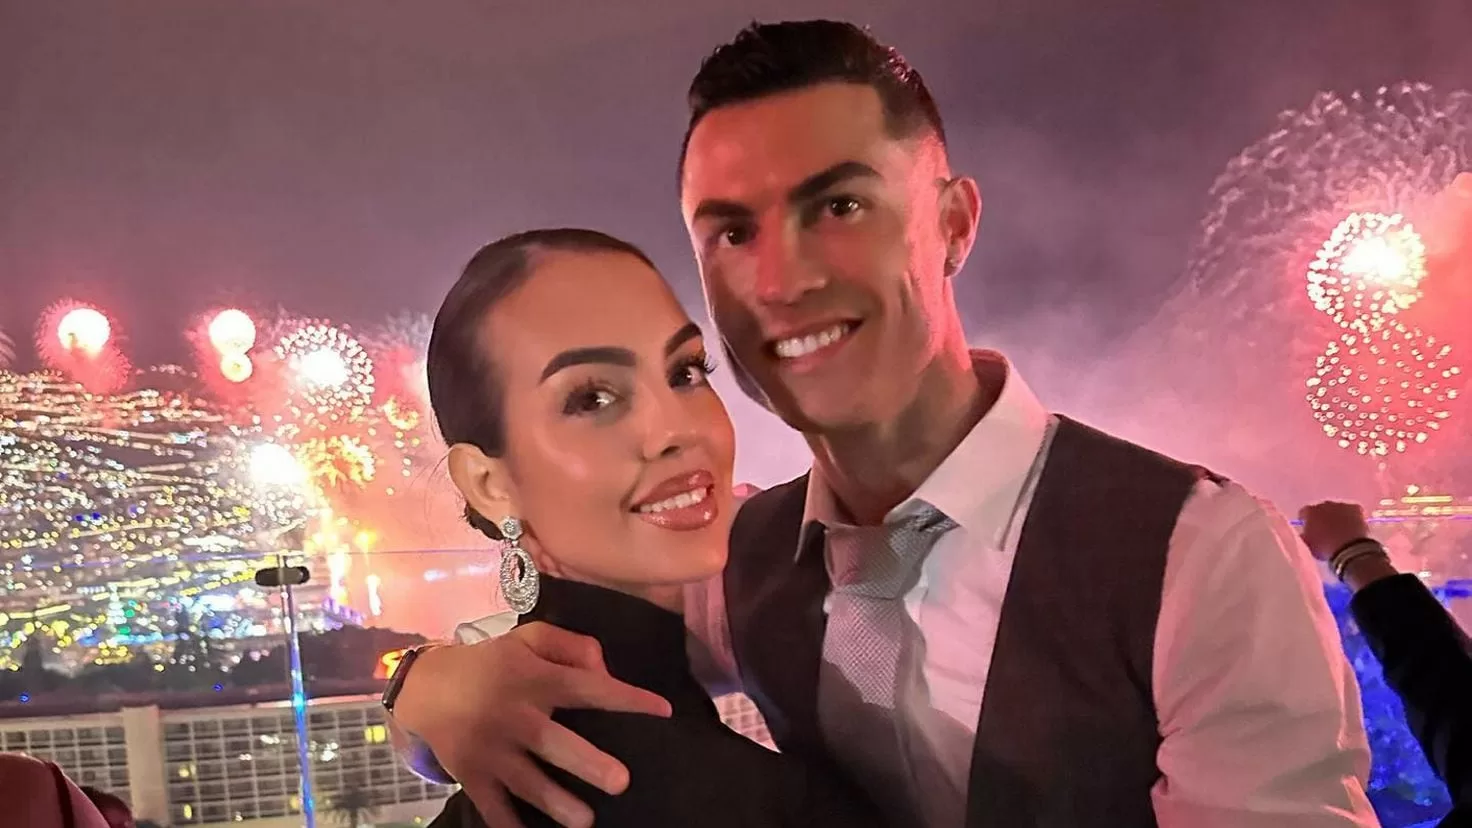 Cristiano Ronaldo's exclusive gift to Georgina: a watch full of gems
